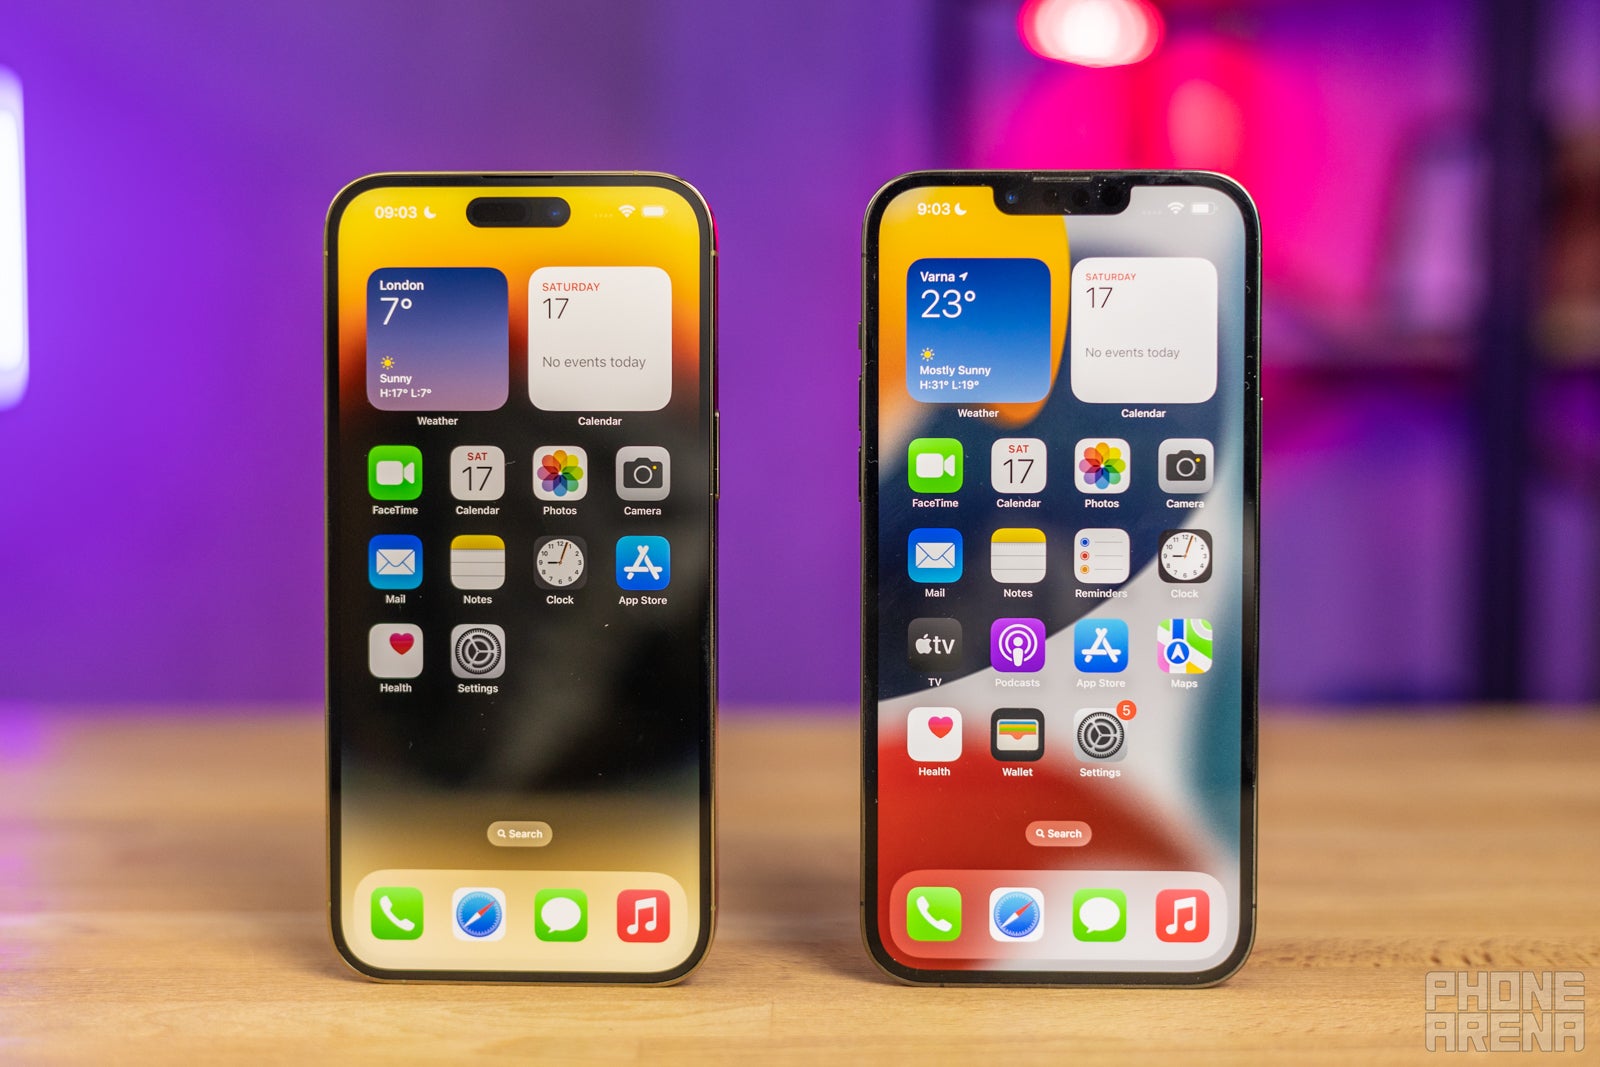 iPhone 14 Pro Max vs iPhone 13 Pro Max: main differences - PhoneArena